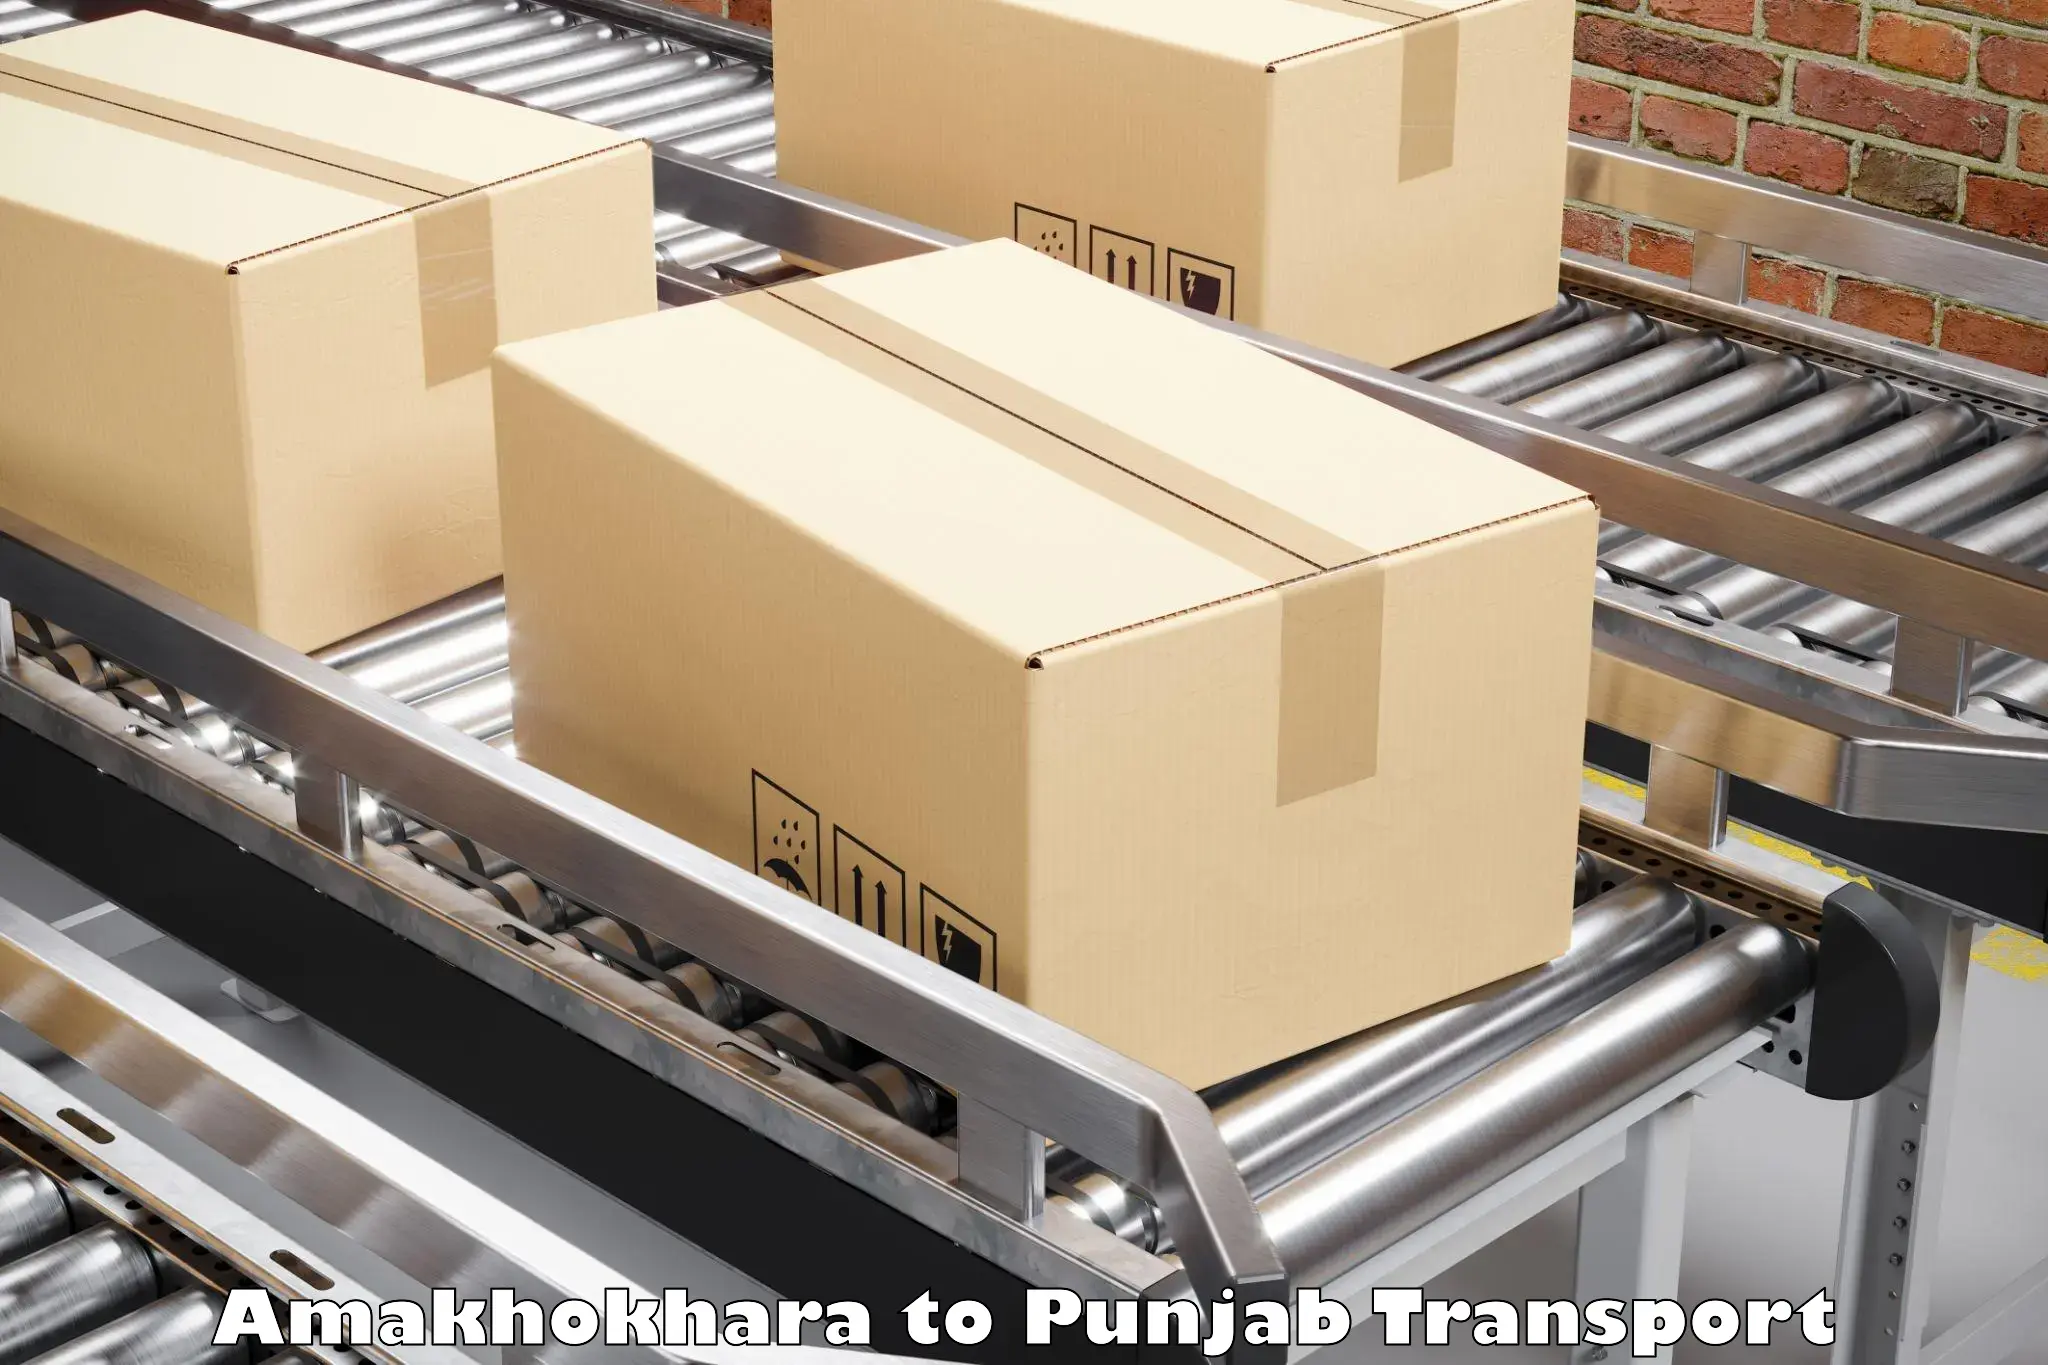 Container transport service Amakhokhara to Ludhiana